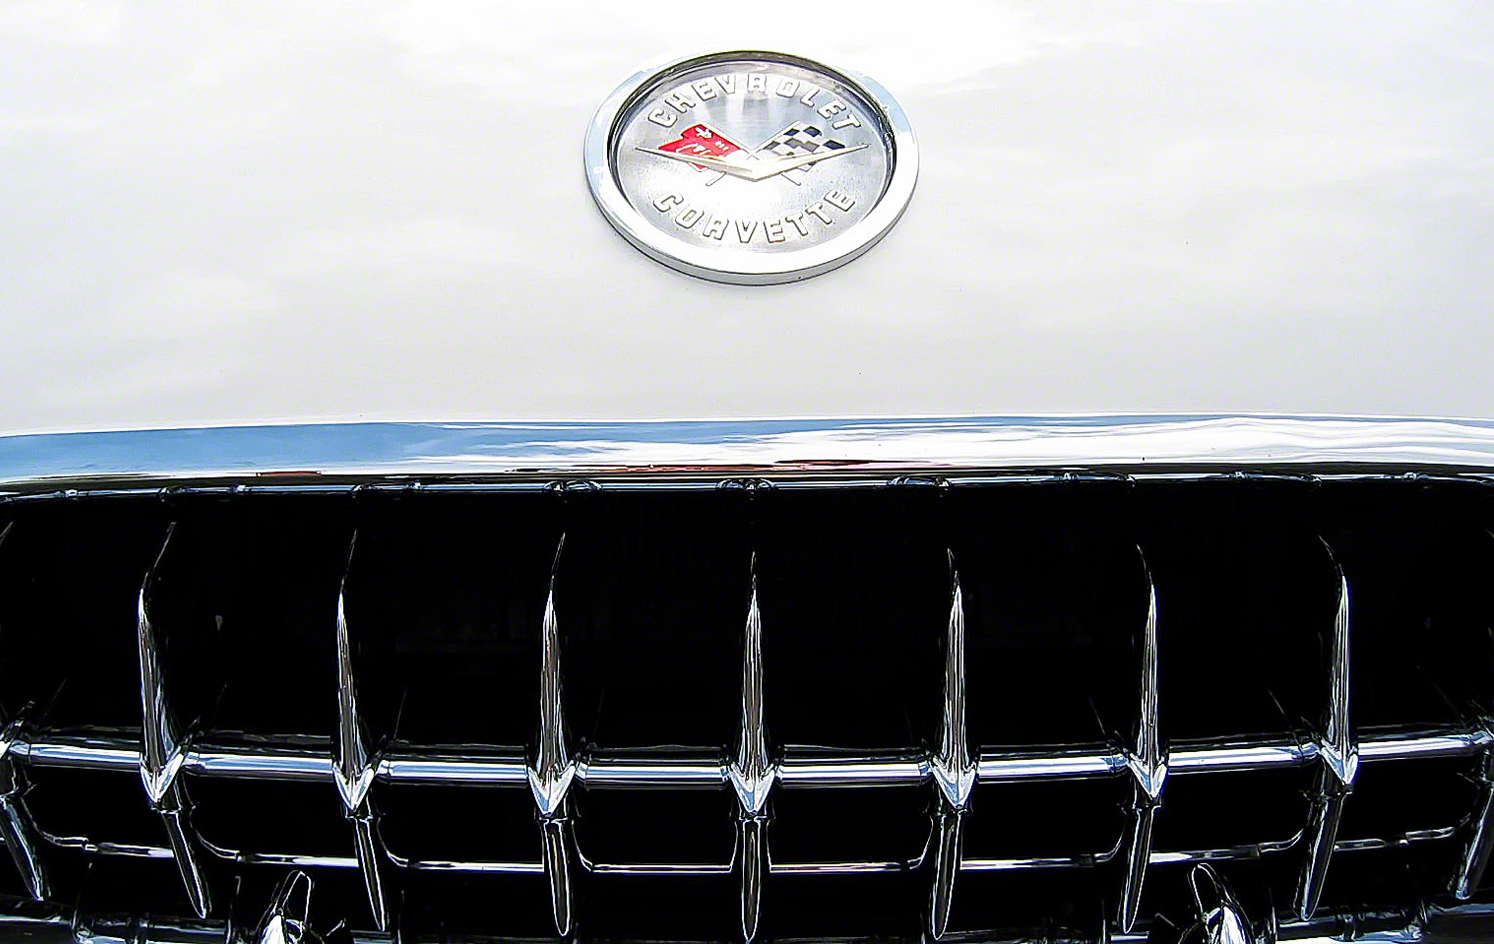 The heavey grill teeth of the 1960 Corvette Sting Ray compliment the new style tailights  molded into the rear fenders.